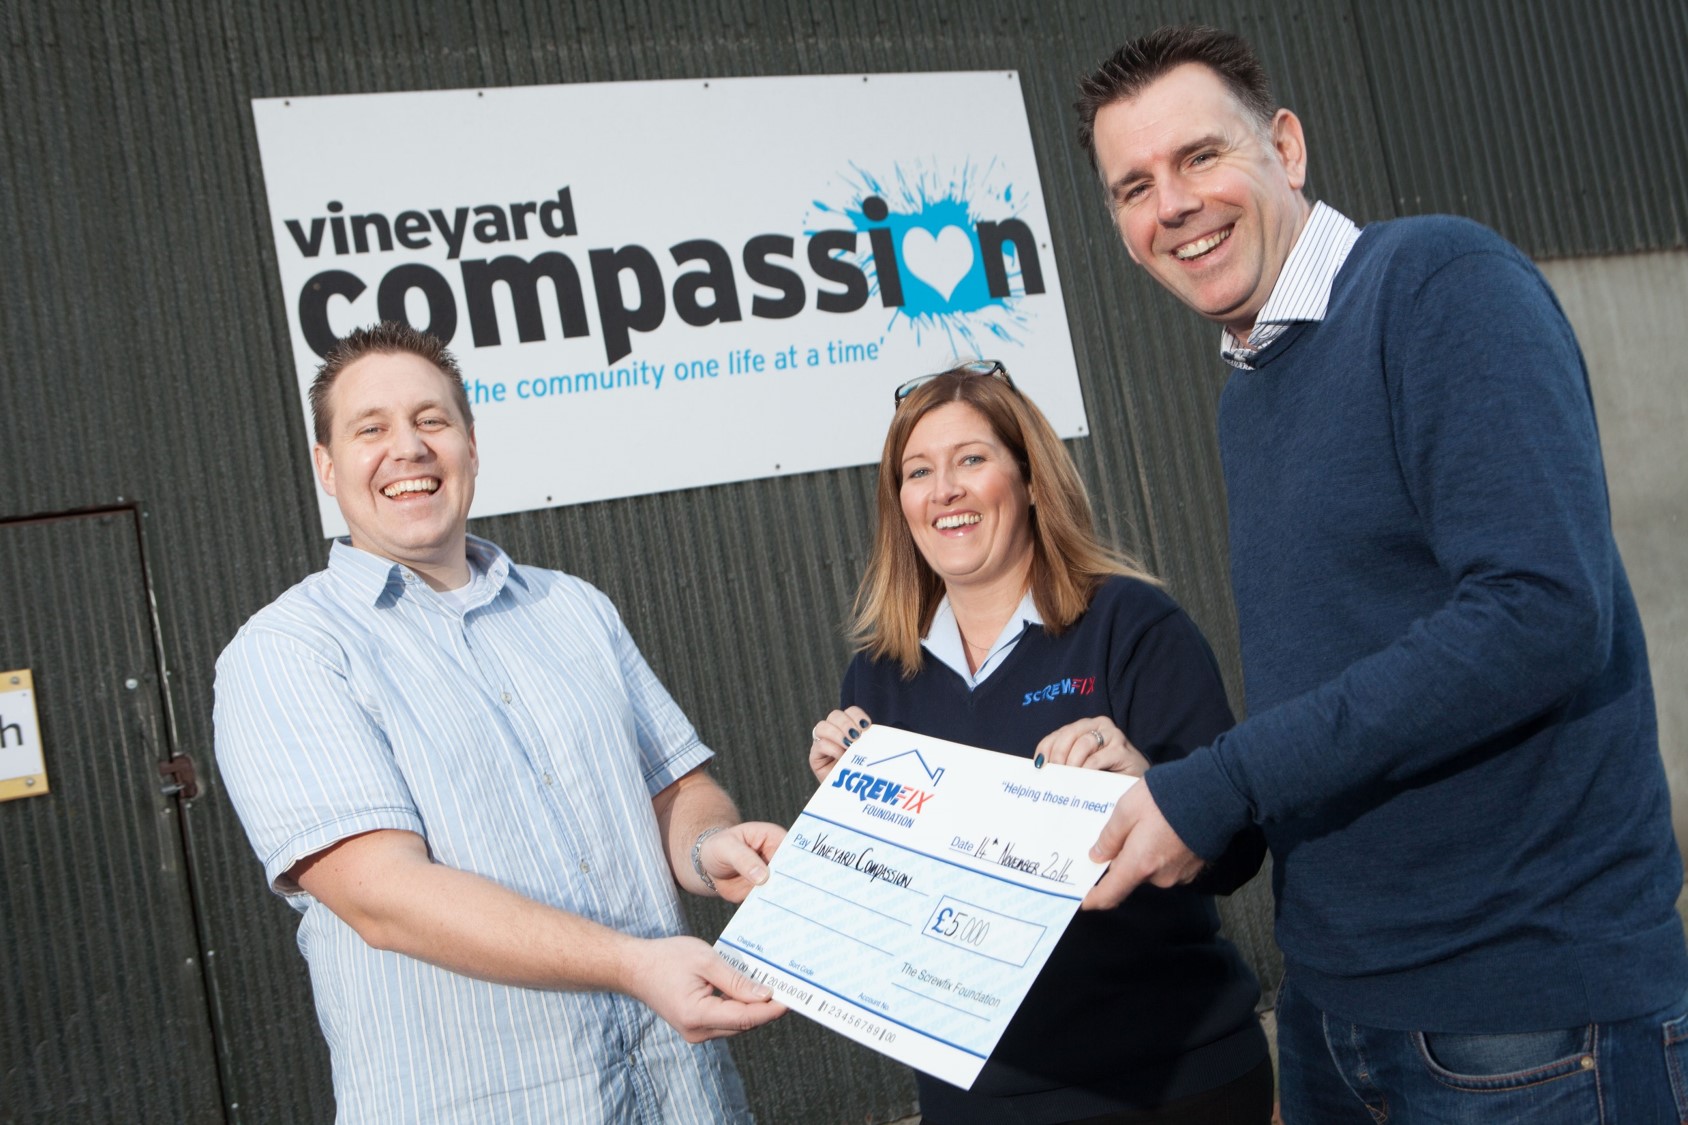 Vineyard Compassion gets a helping hand from the Screwfix Foundation